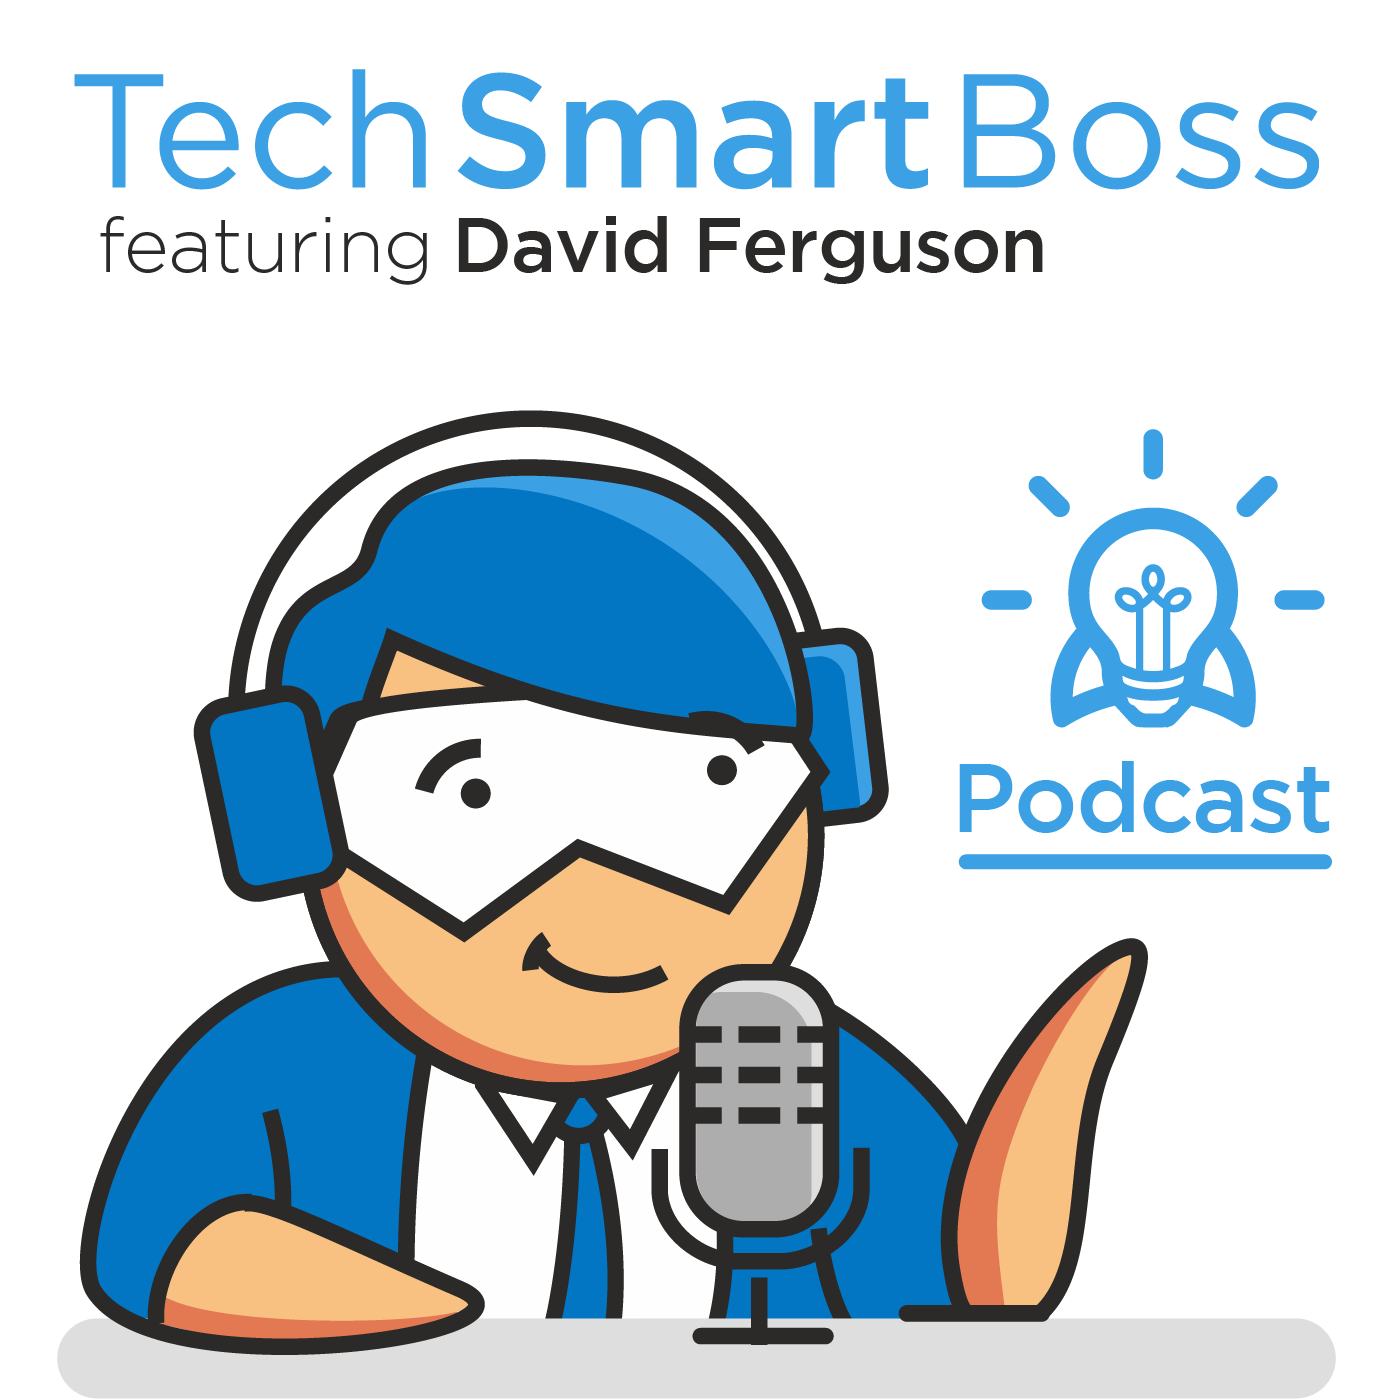 Episode 104: 7 Tips To Be Your Best As A Remote Worker (The Tech Smart Boss Way)